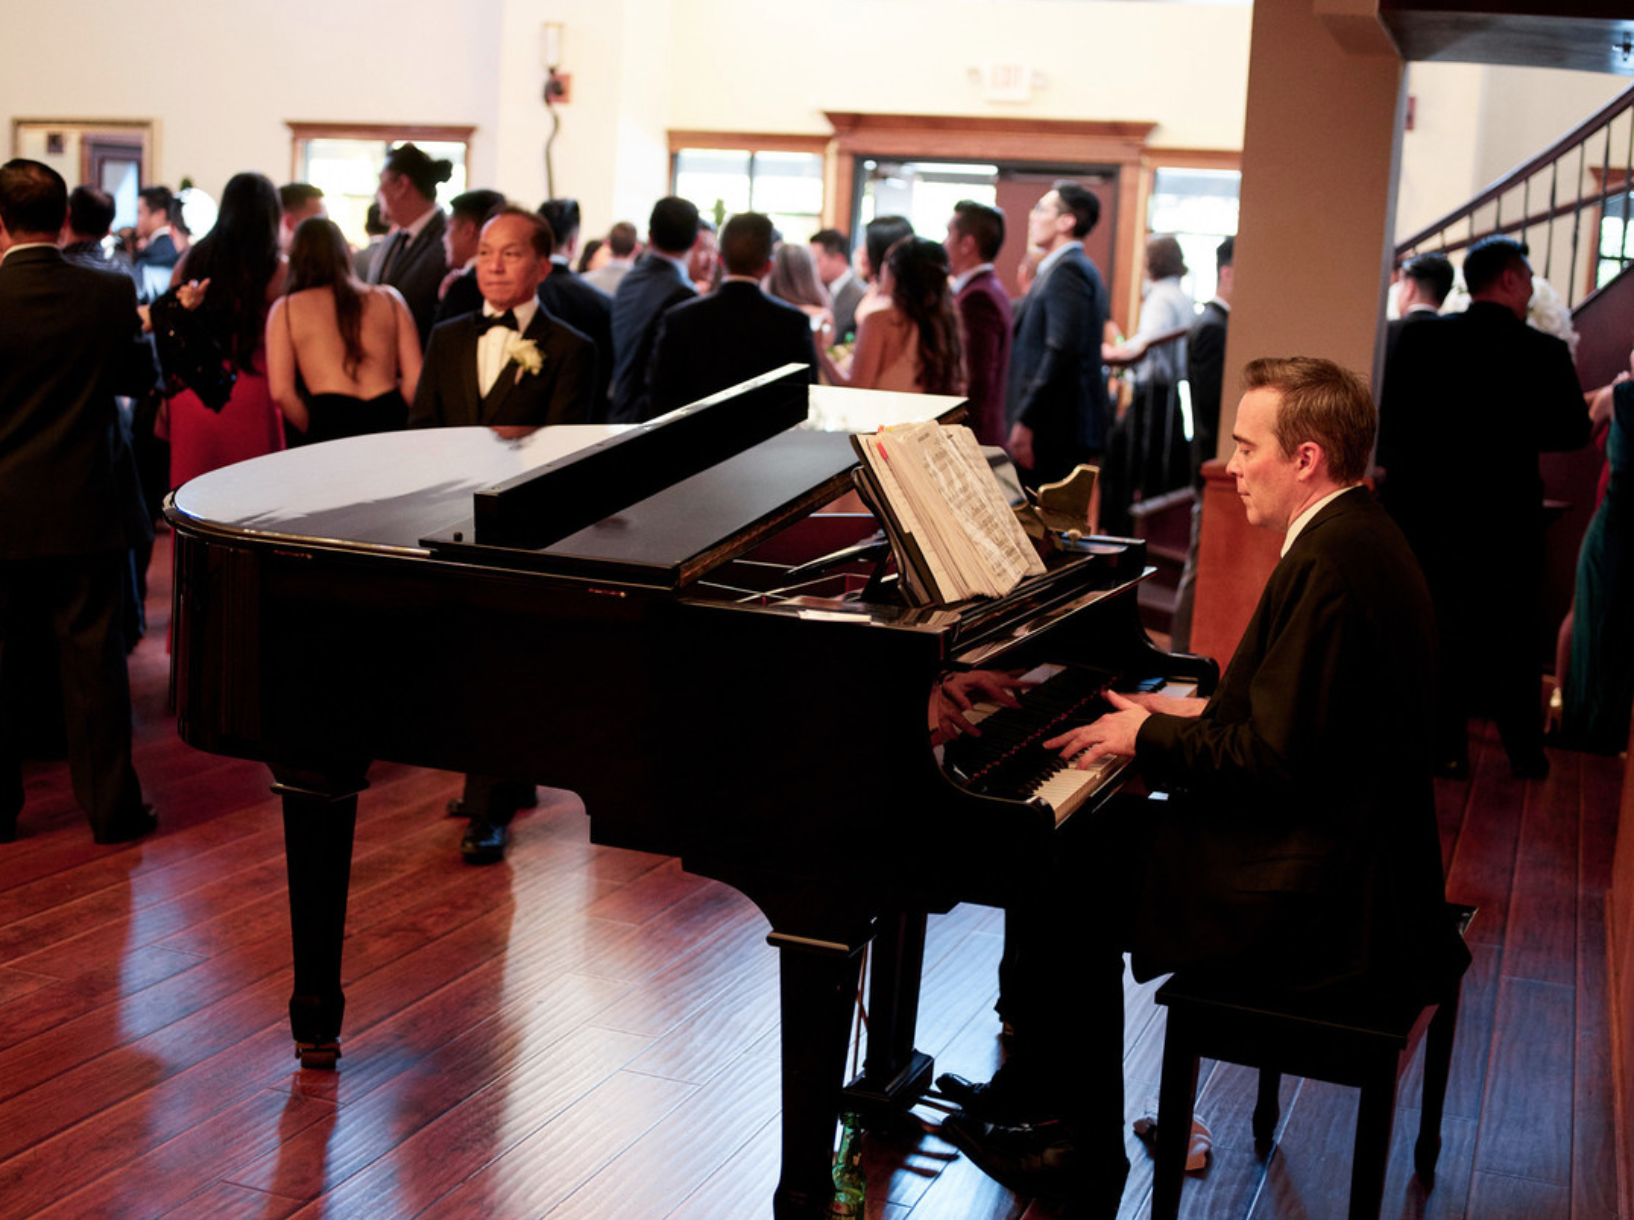 One of Houston's top wedding entertainers, Scott Graham plays the piano at a wedding.